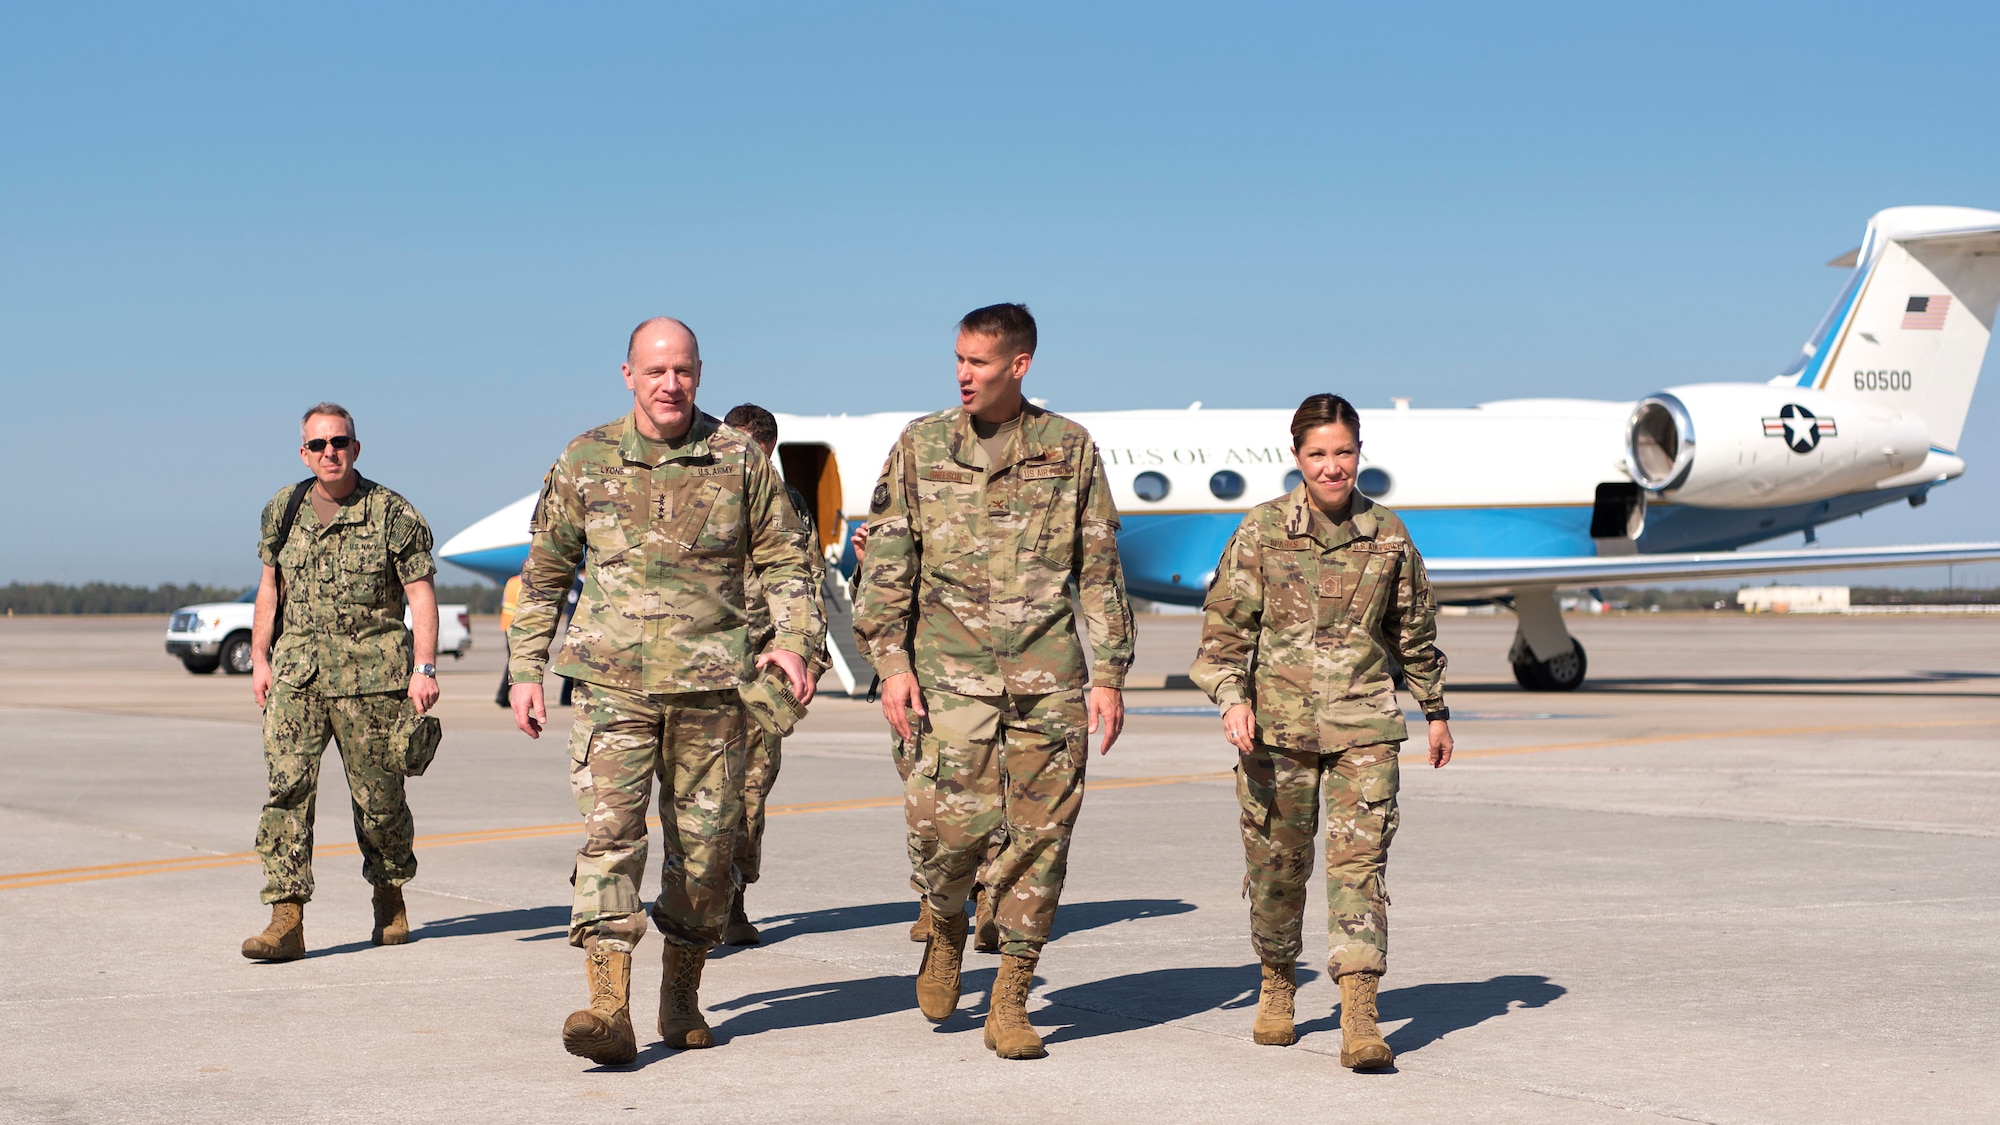 U.S. Army Gen. Stephen Lyons, U.S. Transportation Command commander, walks off the flightline at MacDill Air Force Base, Fla., after being greeted by 6th Air Mobility Wing leadership Feb. 8, 2019. As the USTRANSCOM commander, Lyons visited MacDill to learn more about how the KC-135 Stratotanker helps project and sustain forces whenever and wherever needed. USTRANSCOM is a unified, functional combatant command that provides support to the nine other U.S. combatant commands, the military services, defense agencies and other government organizations.